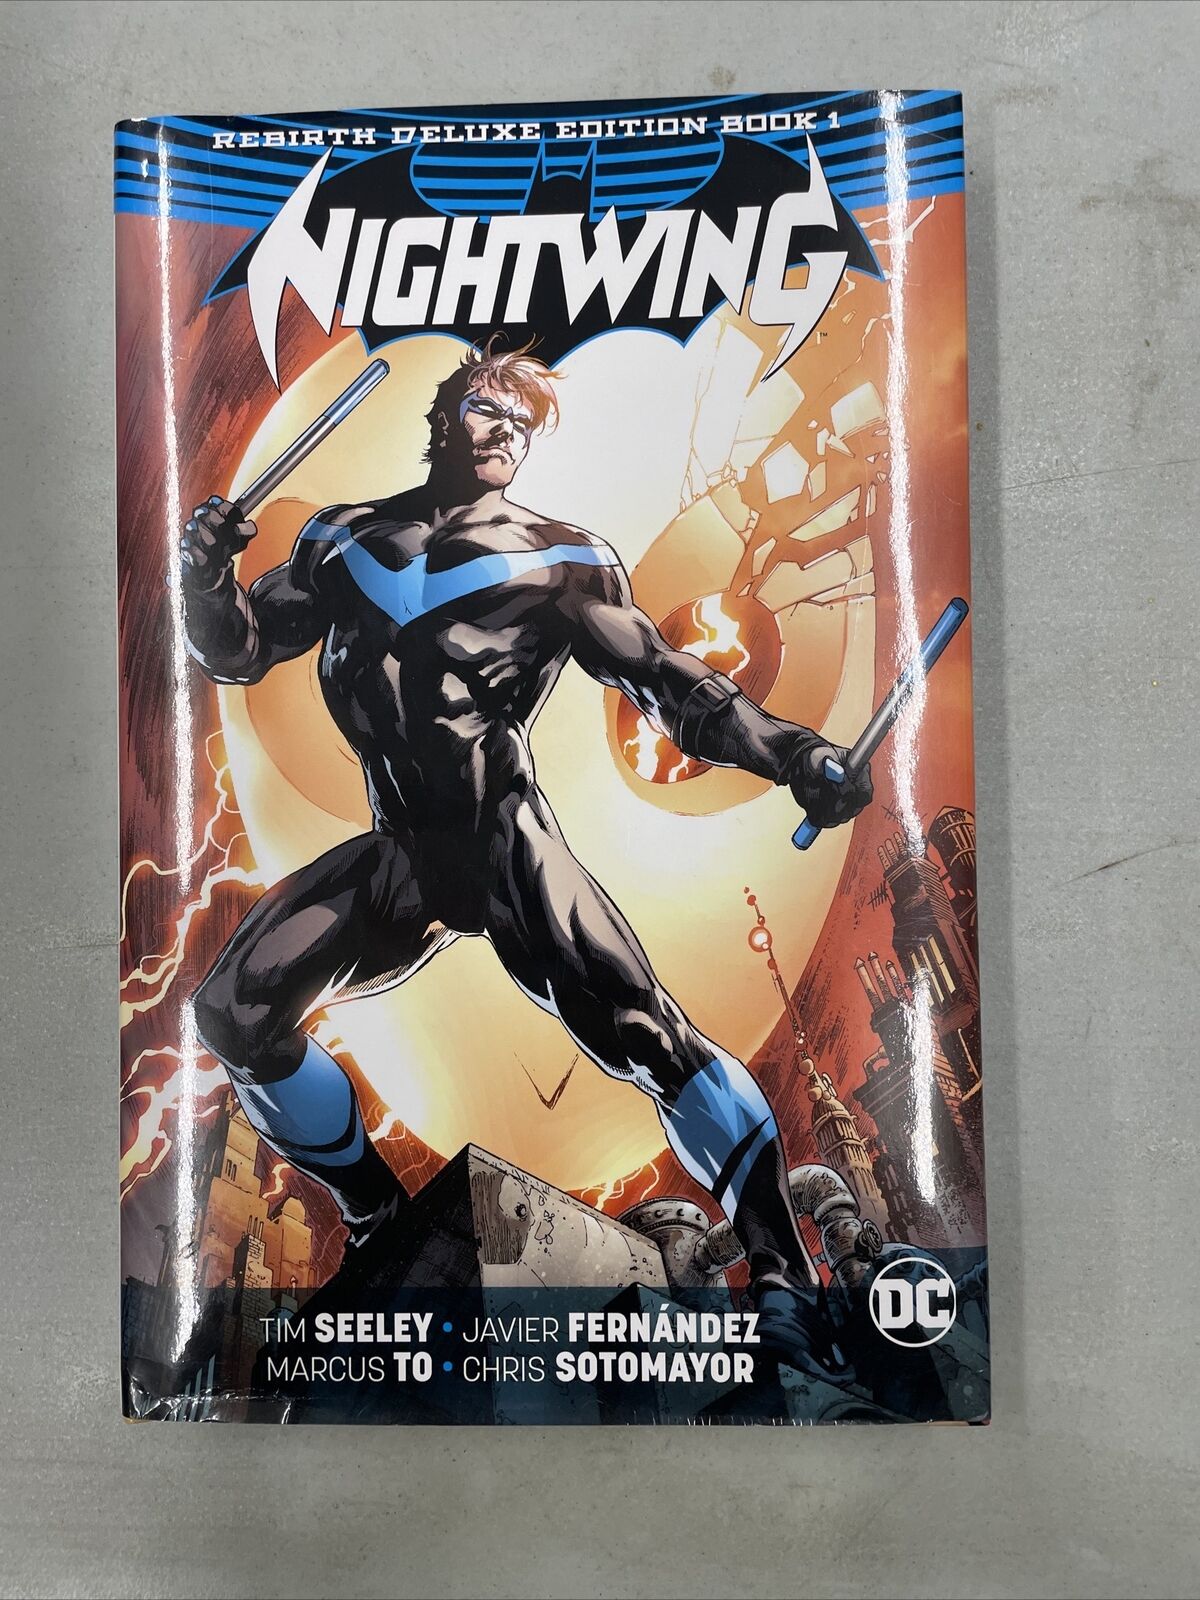 Nightwing: Rebirth Deluxe Edition #1 (DC Comics, December 2017)